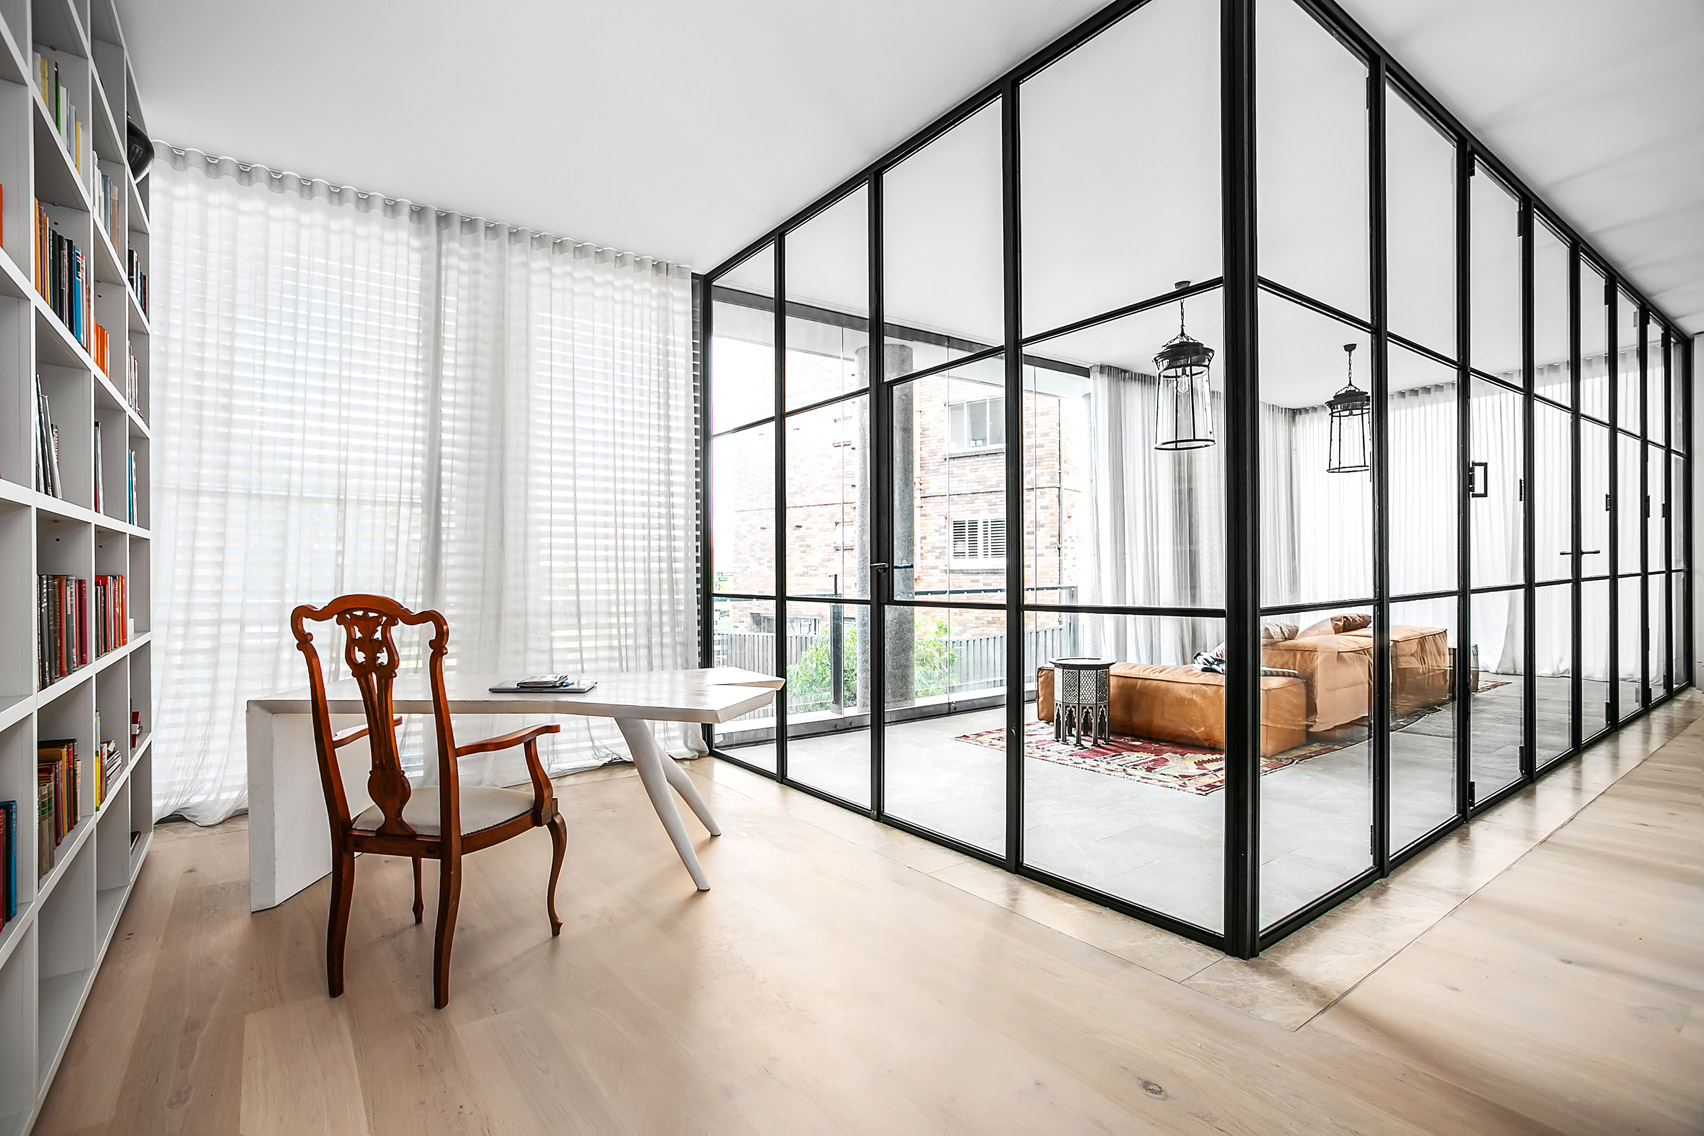 Steel and glass room within a room